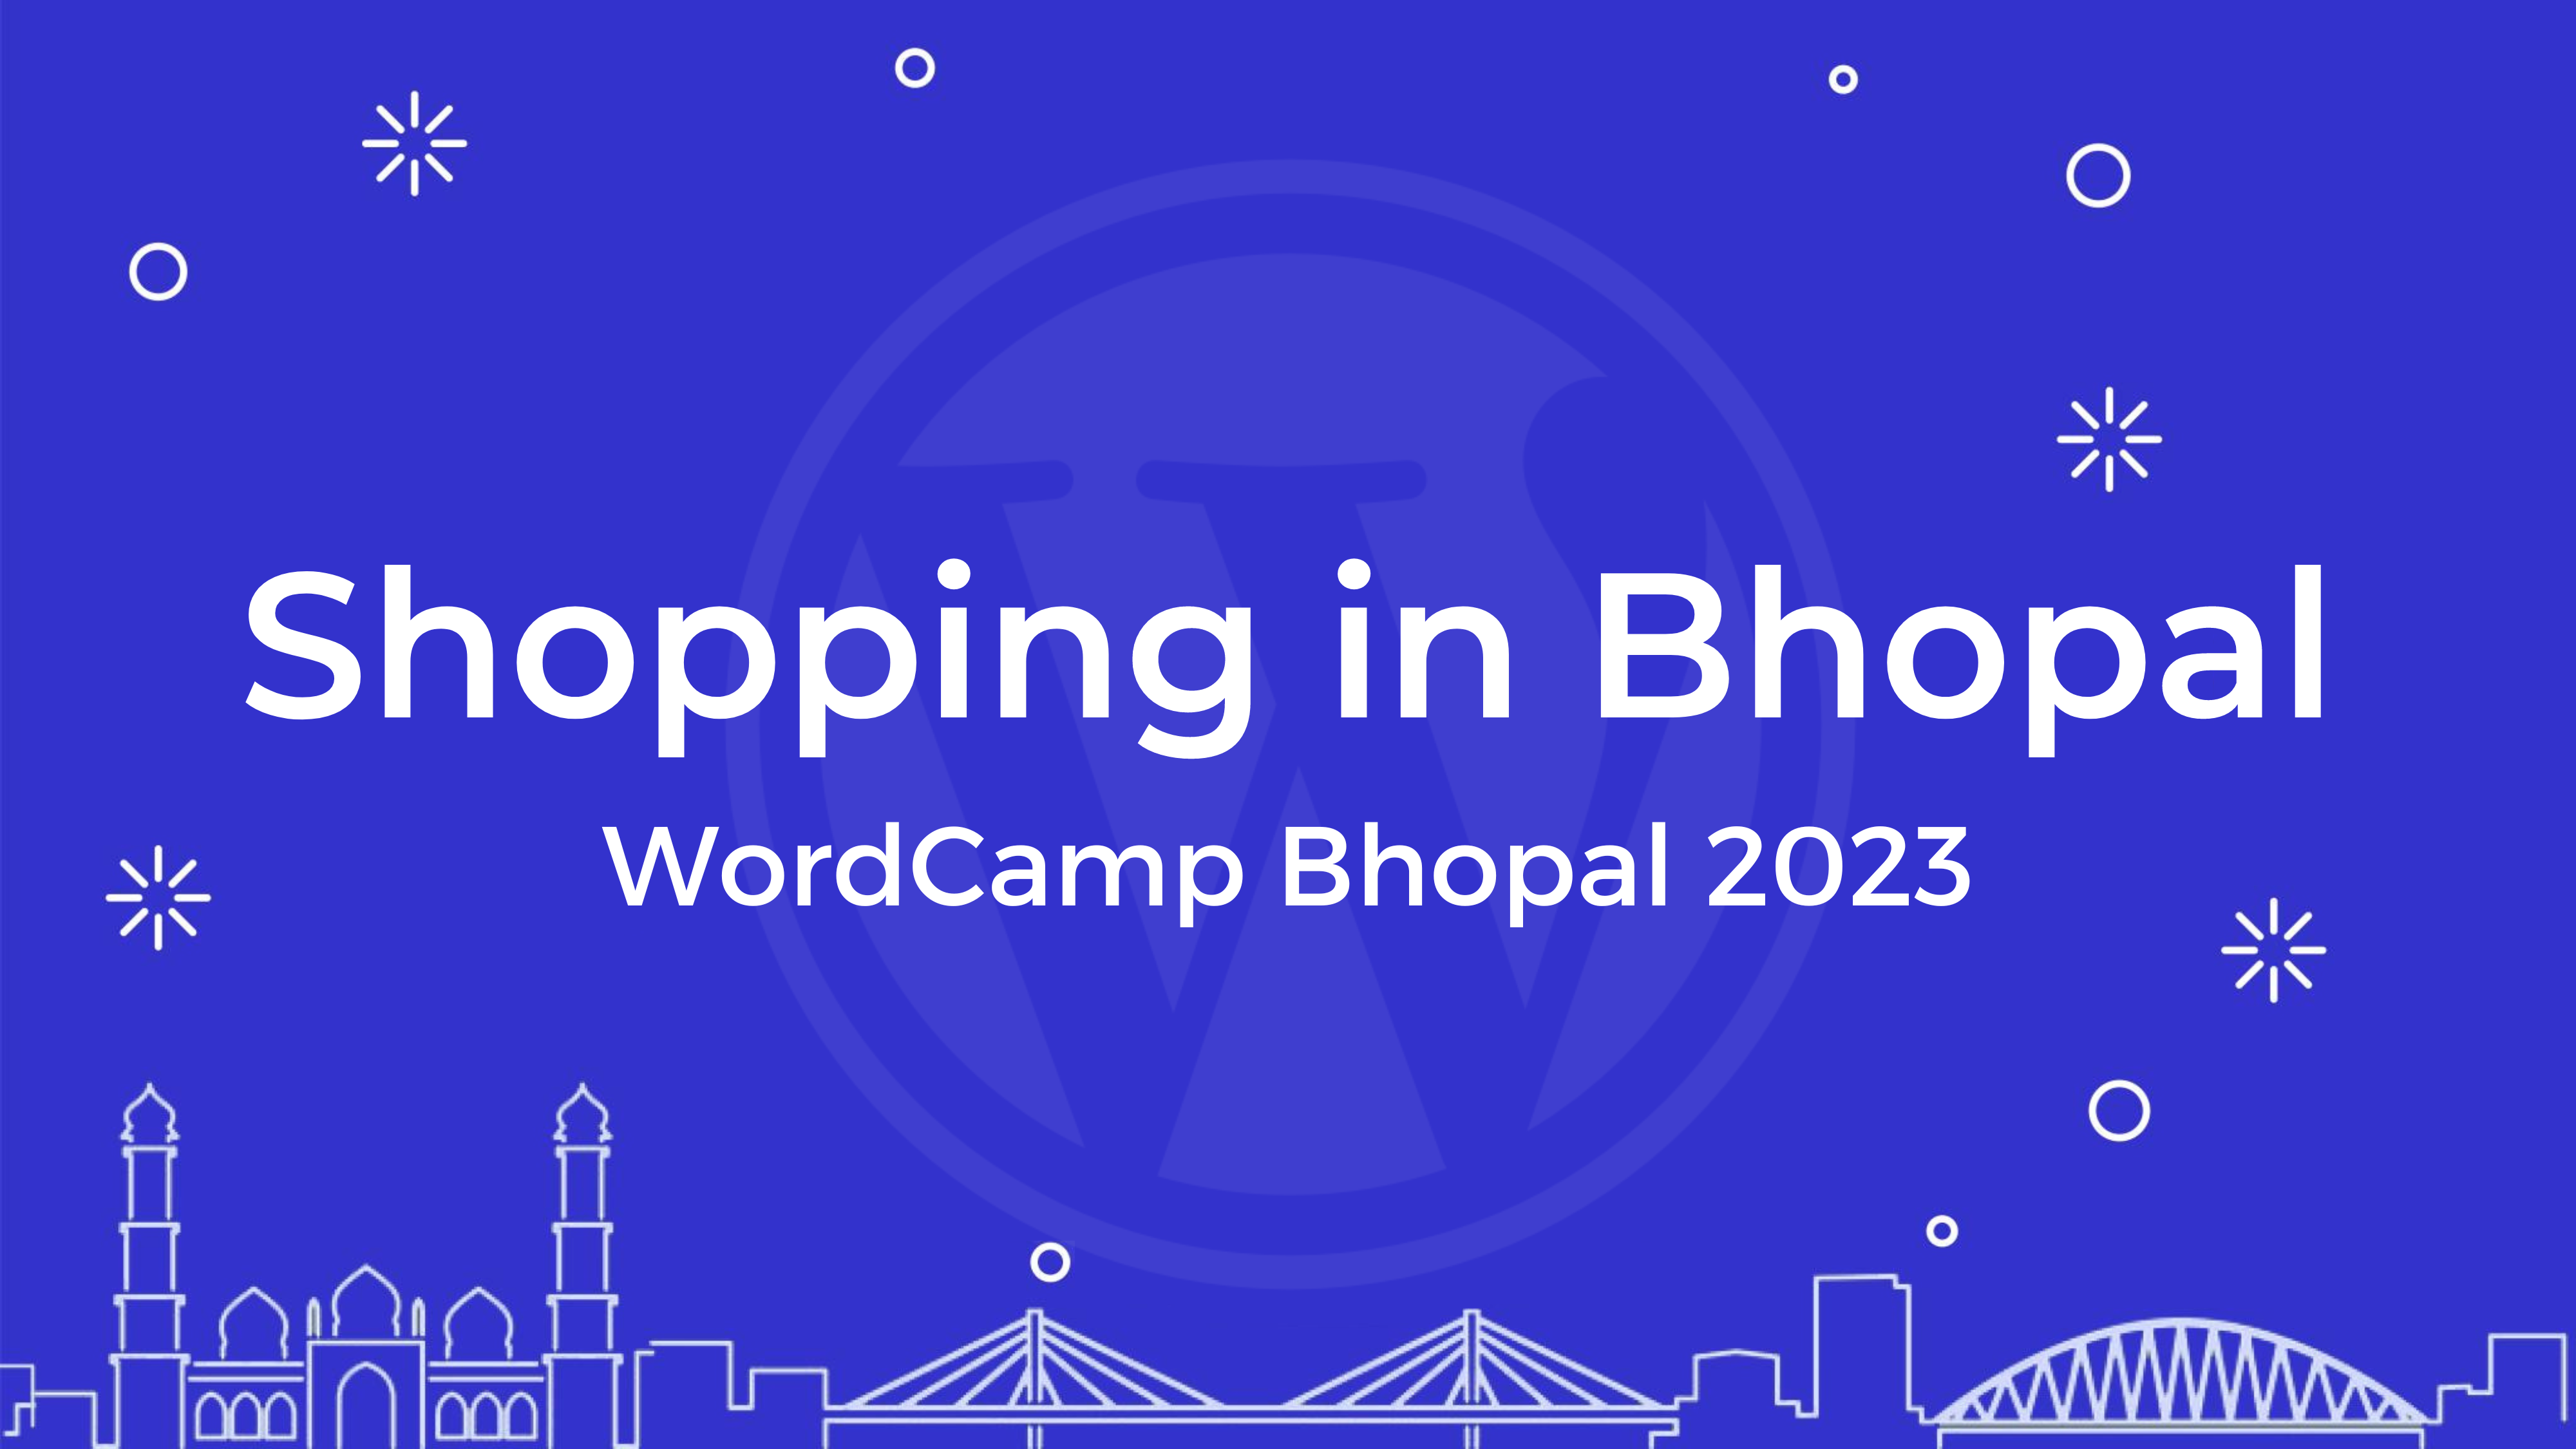 Where to Shop while attending #WCBhopal